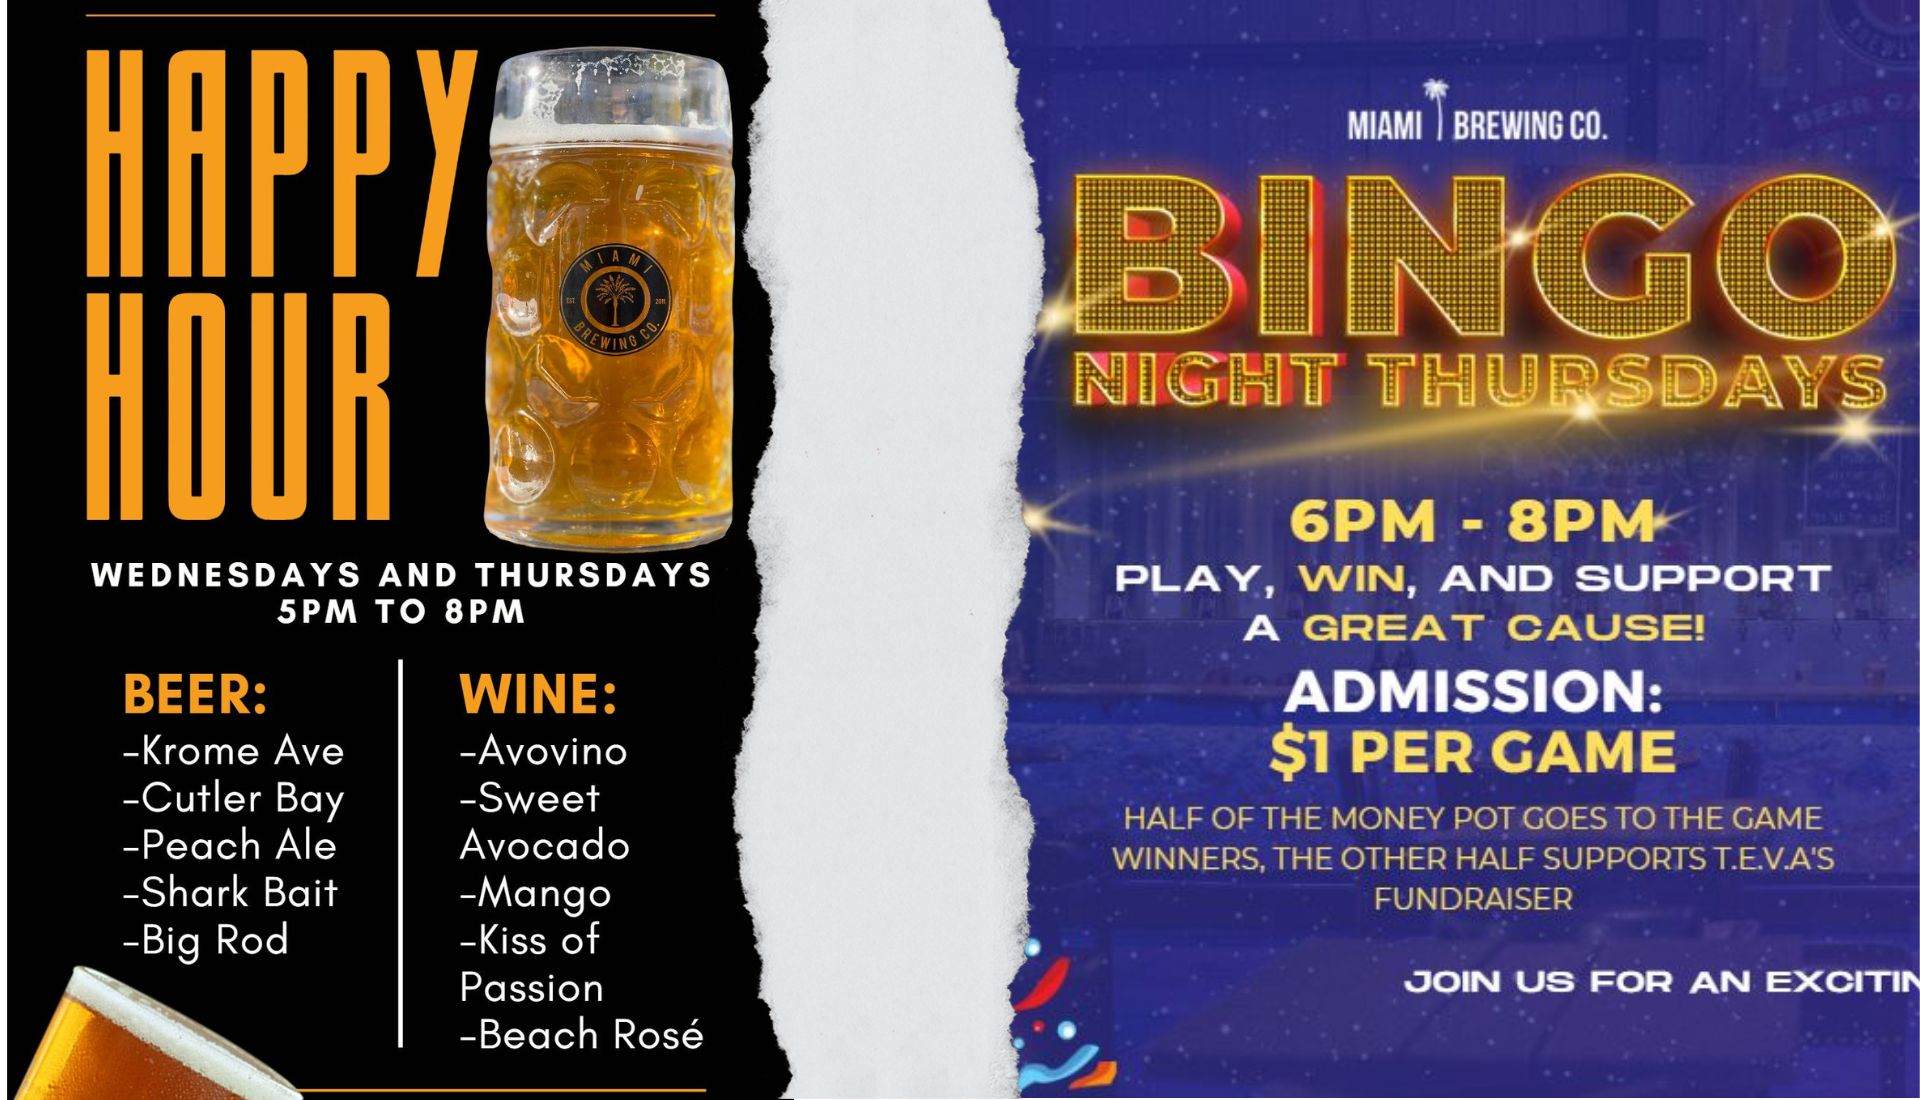 Wednesday and Thursday: Happy Hour and Bingo Night: